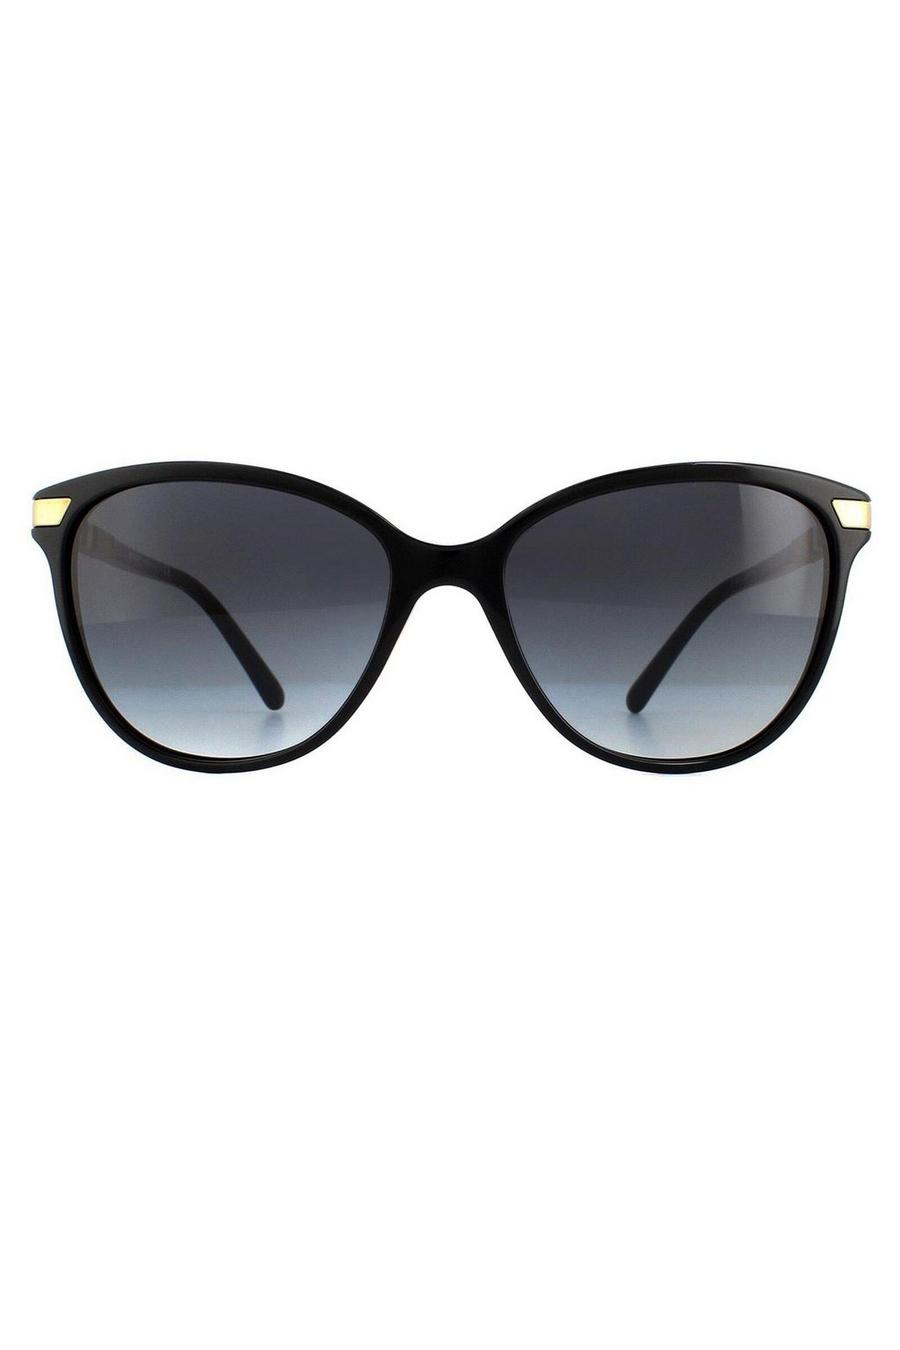 Cat Eye Black With Gold Detailing Grey Gradient BE4216 Sunglasses